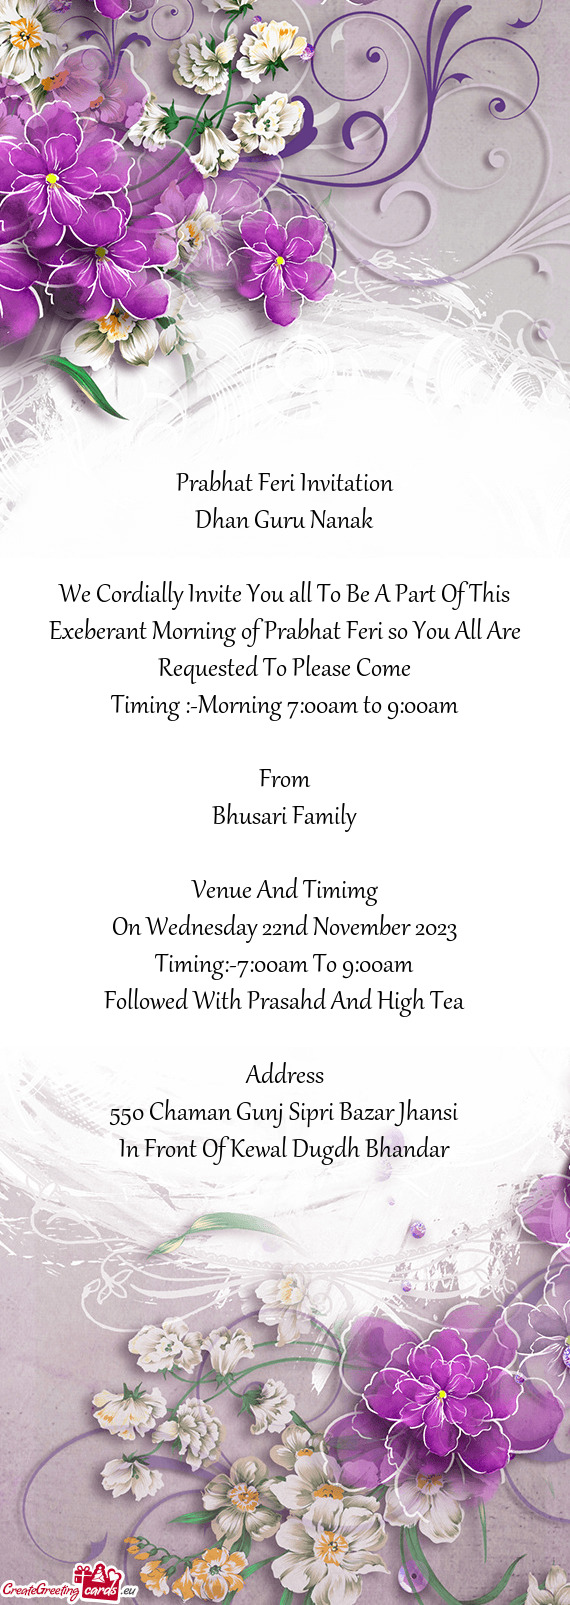 We Cordially Invite You all To Be A Part Of This Exeberant Morning of Prabhat Feri so You All Are Re